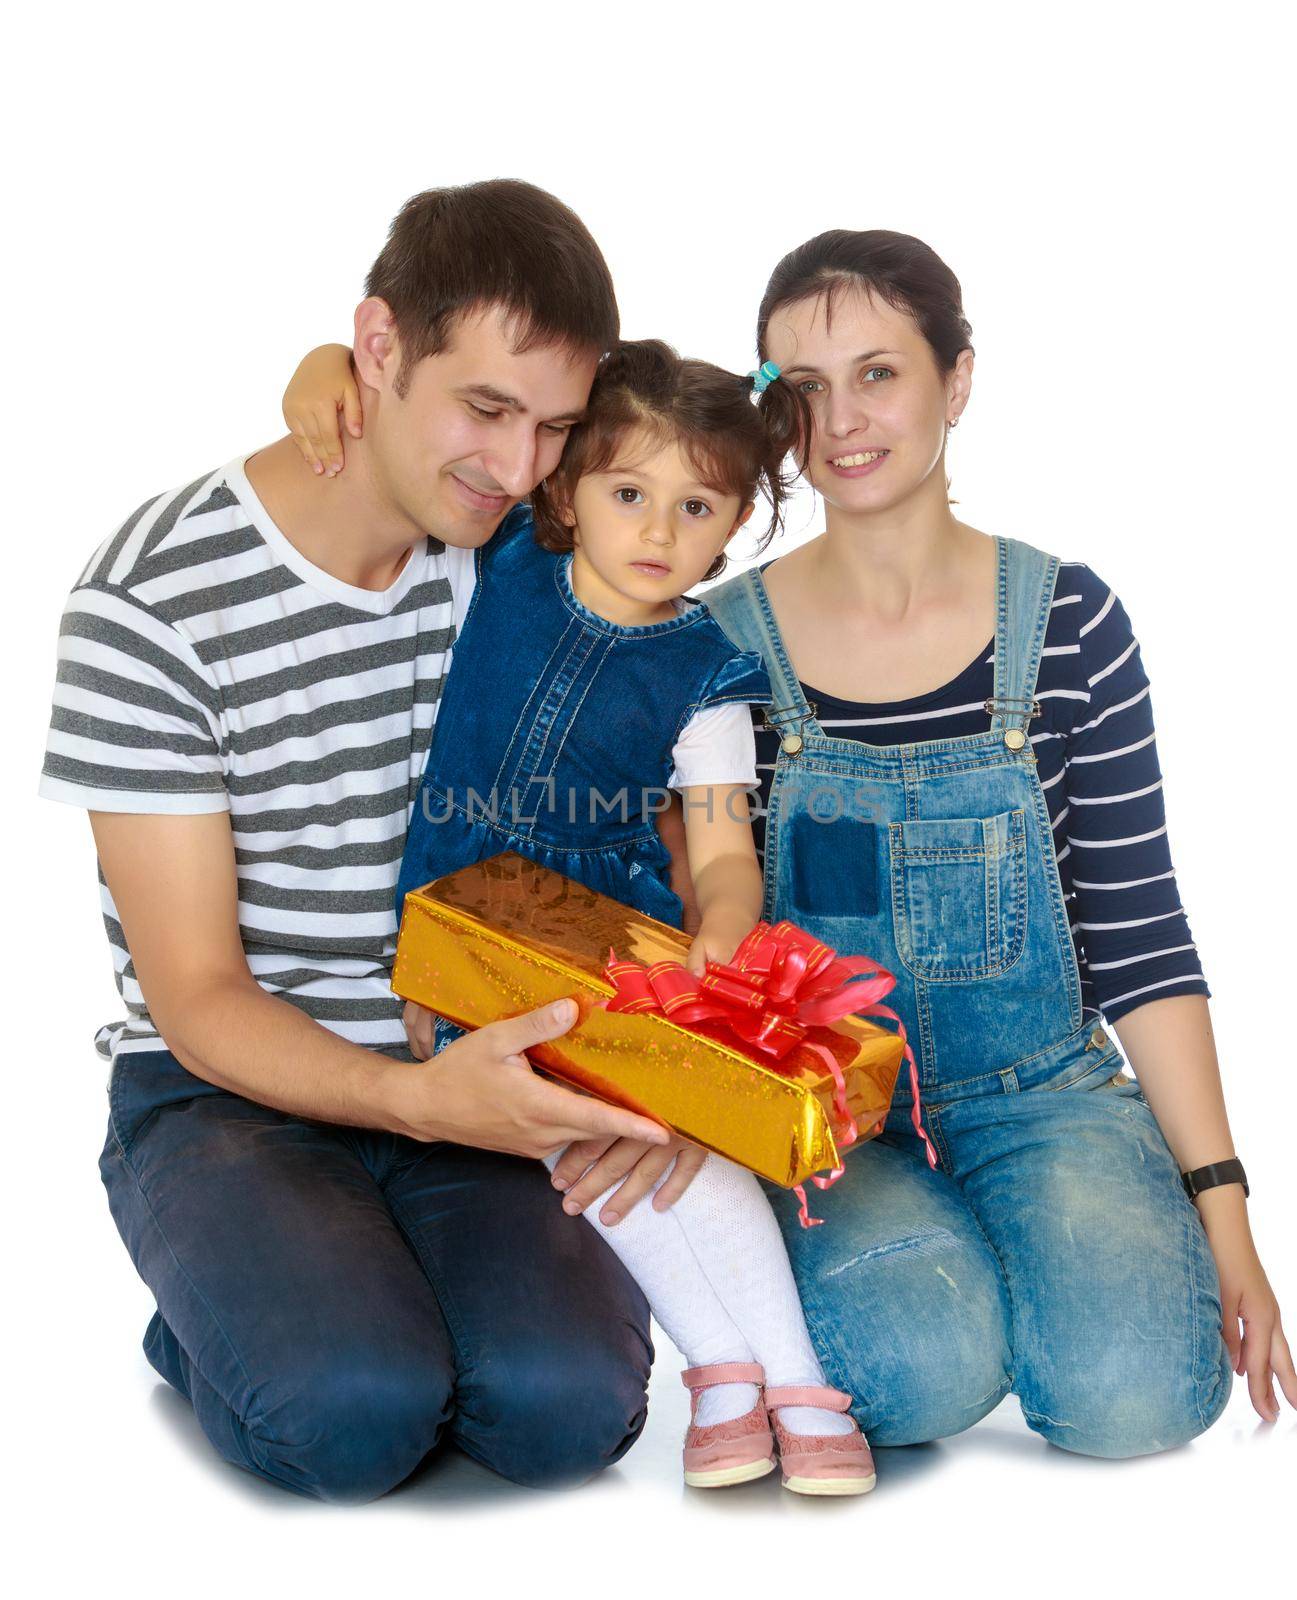 Happy young family with little daughter cuddling together in celebration of Christmas.Isolated on white background.